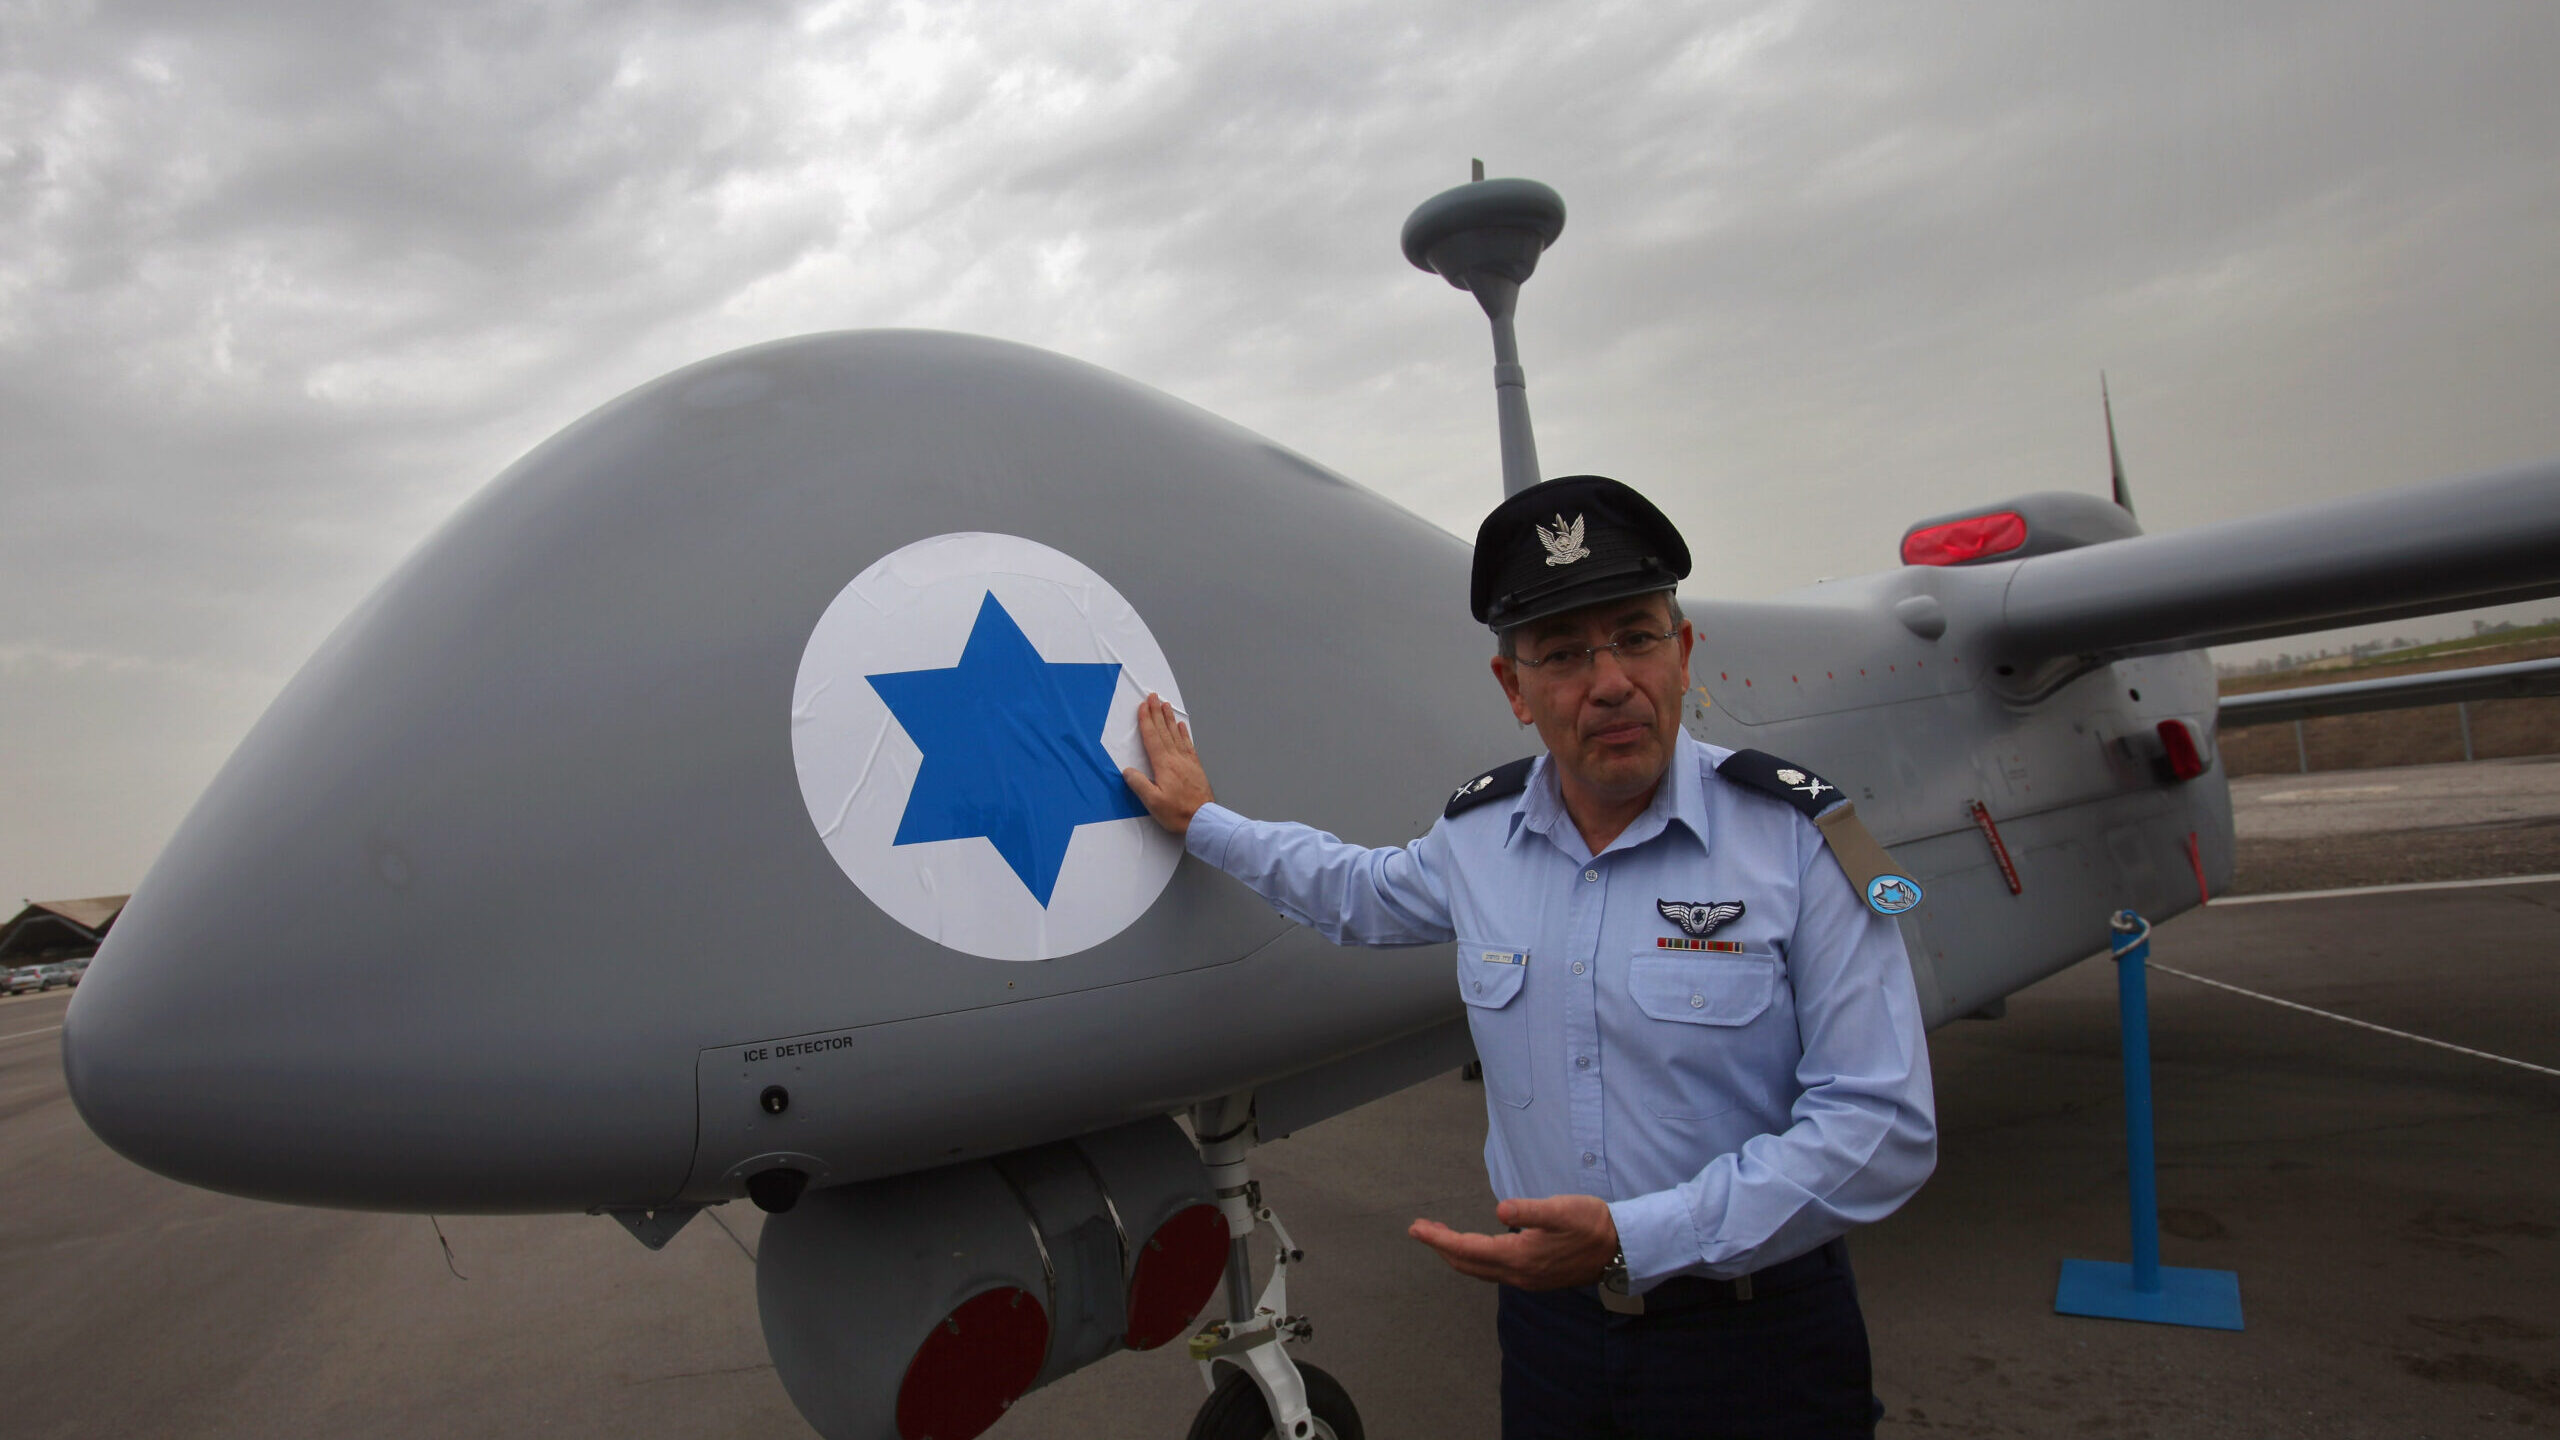 Pressure from industry caused Israel to drop armed drone censorship